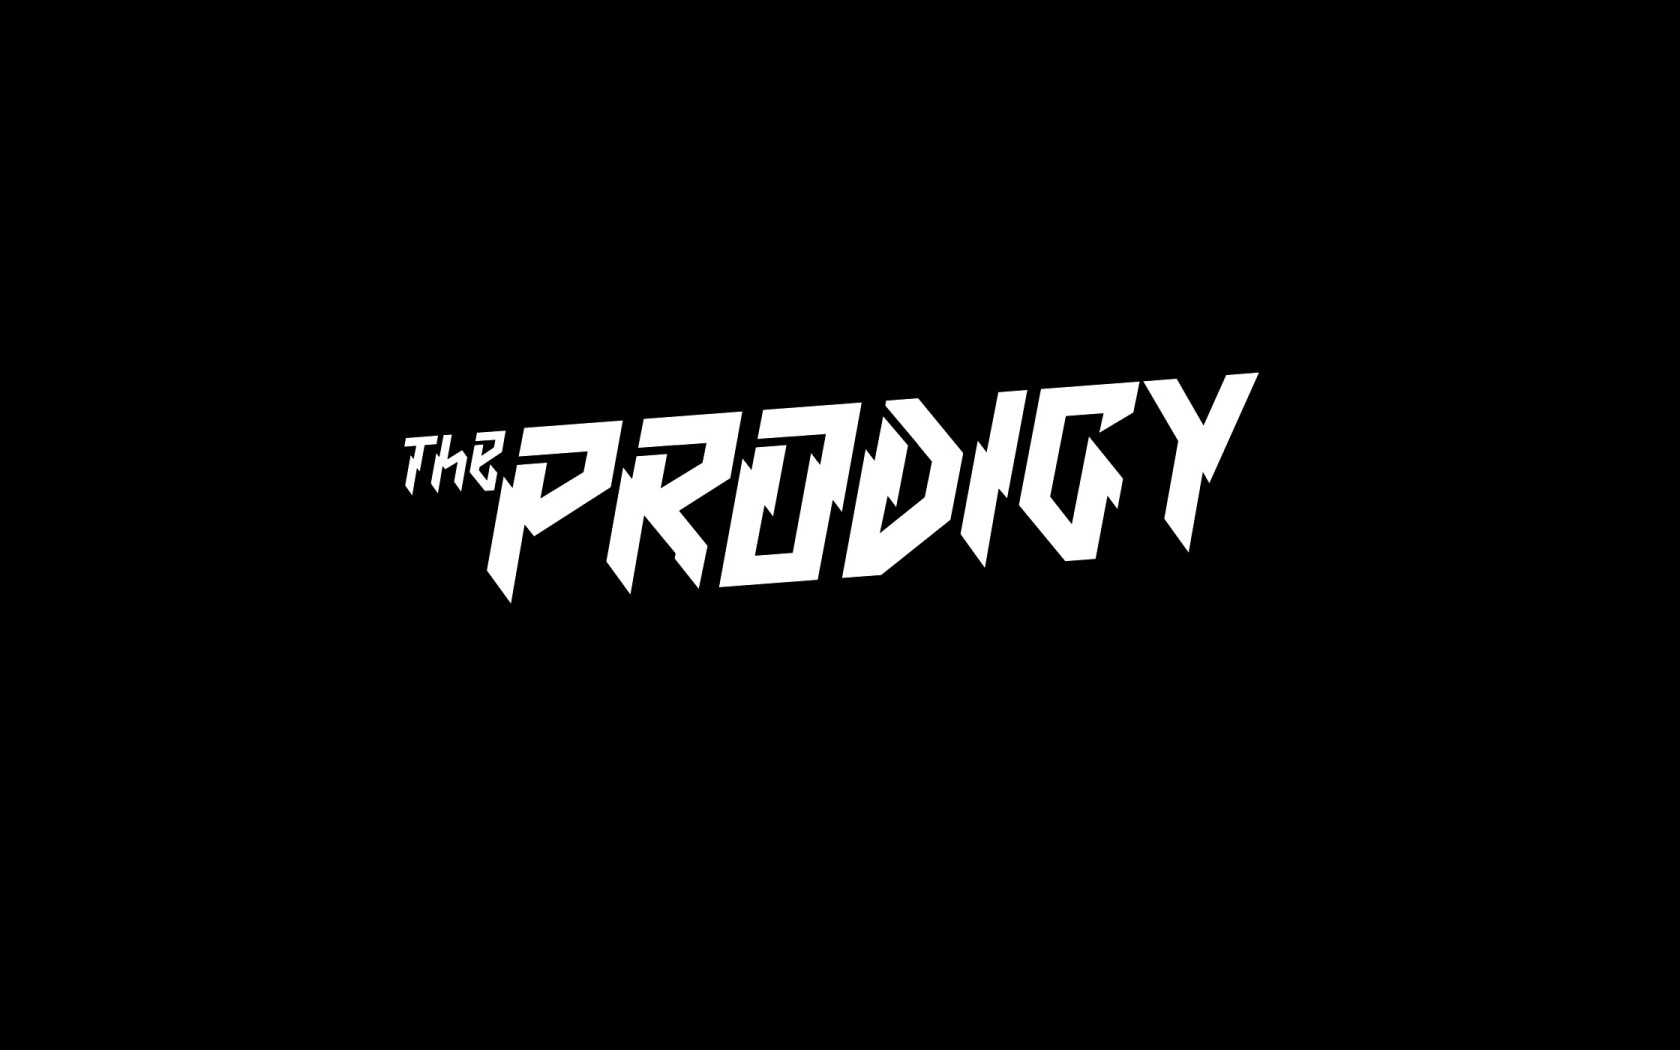 General 1680x1050 The Prodigy minimalism typography music simple background black background